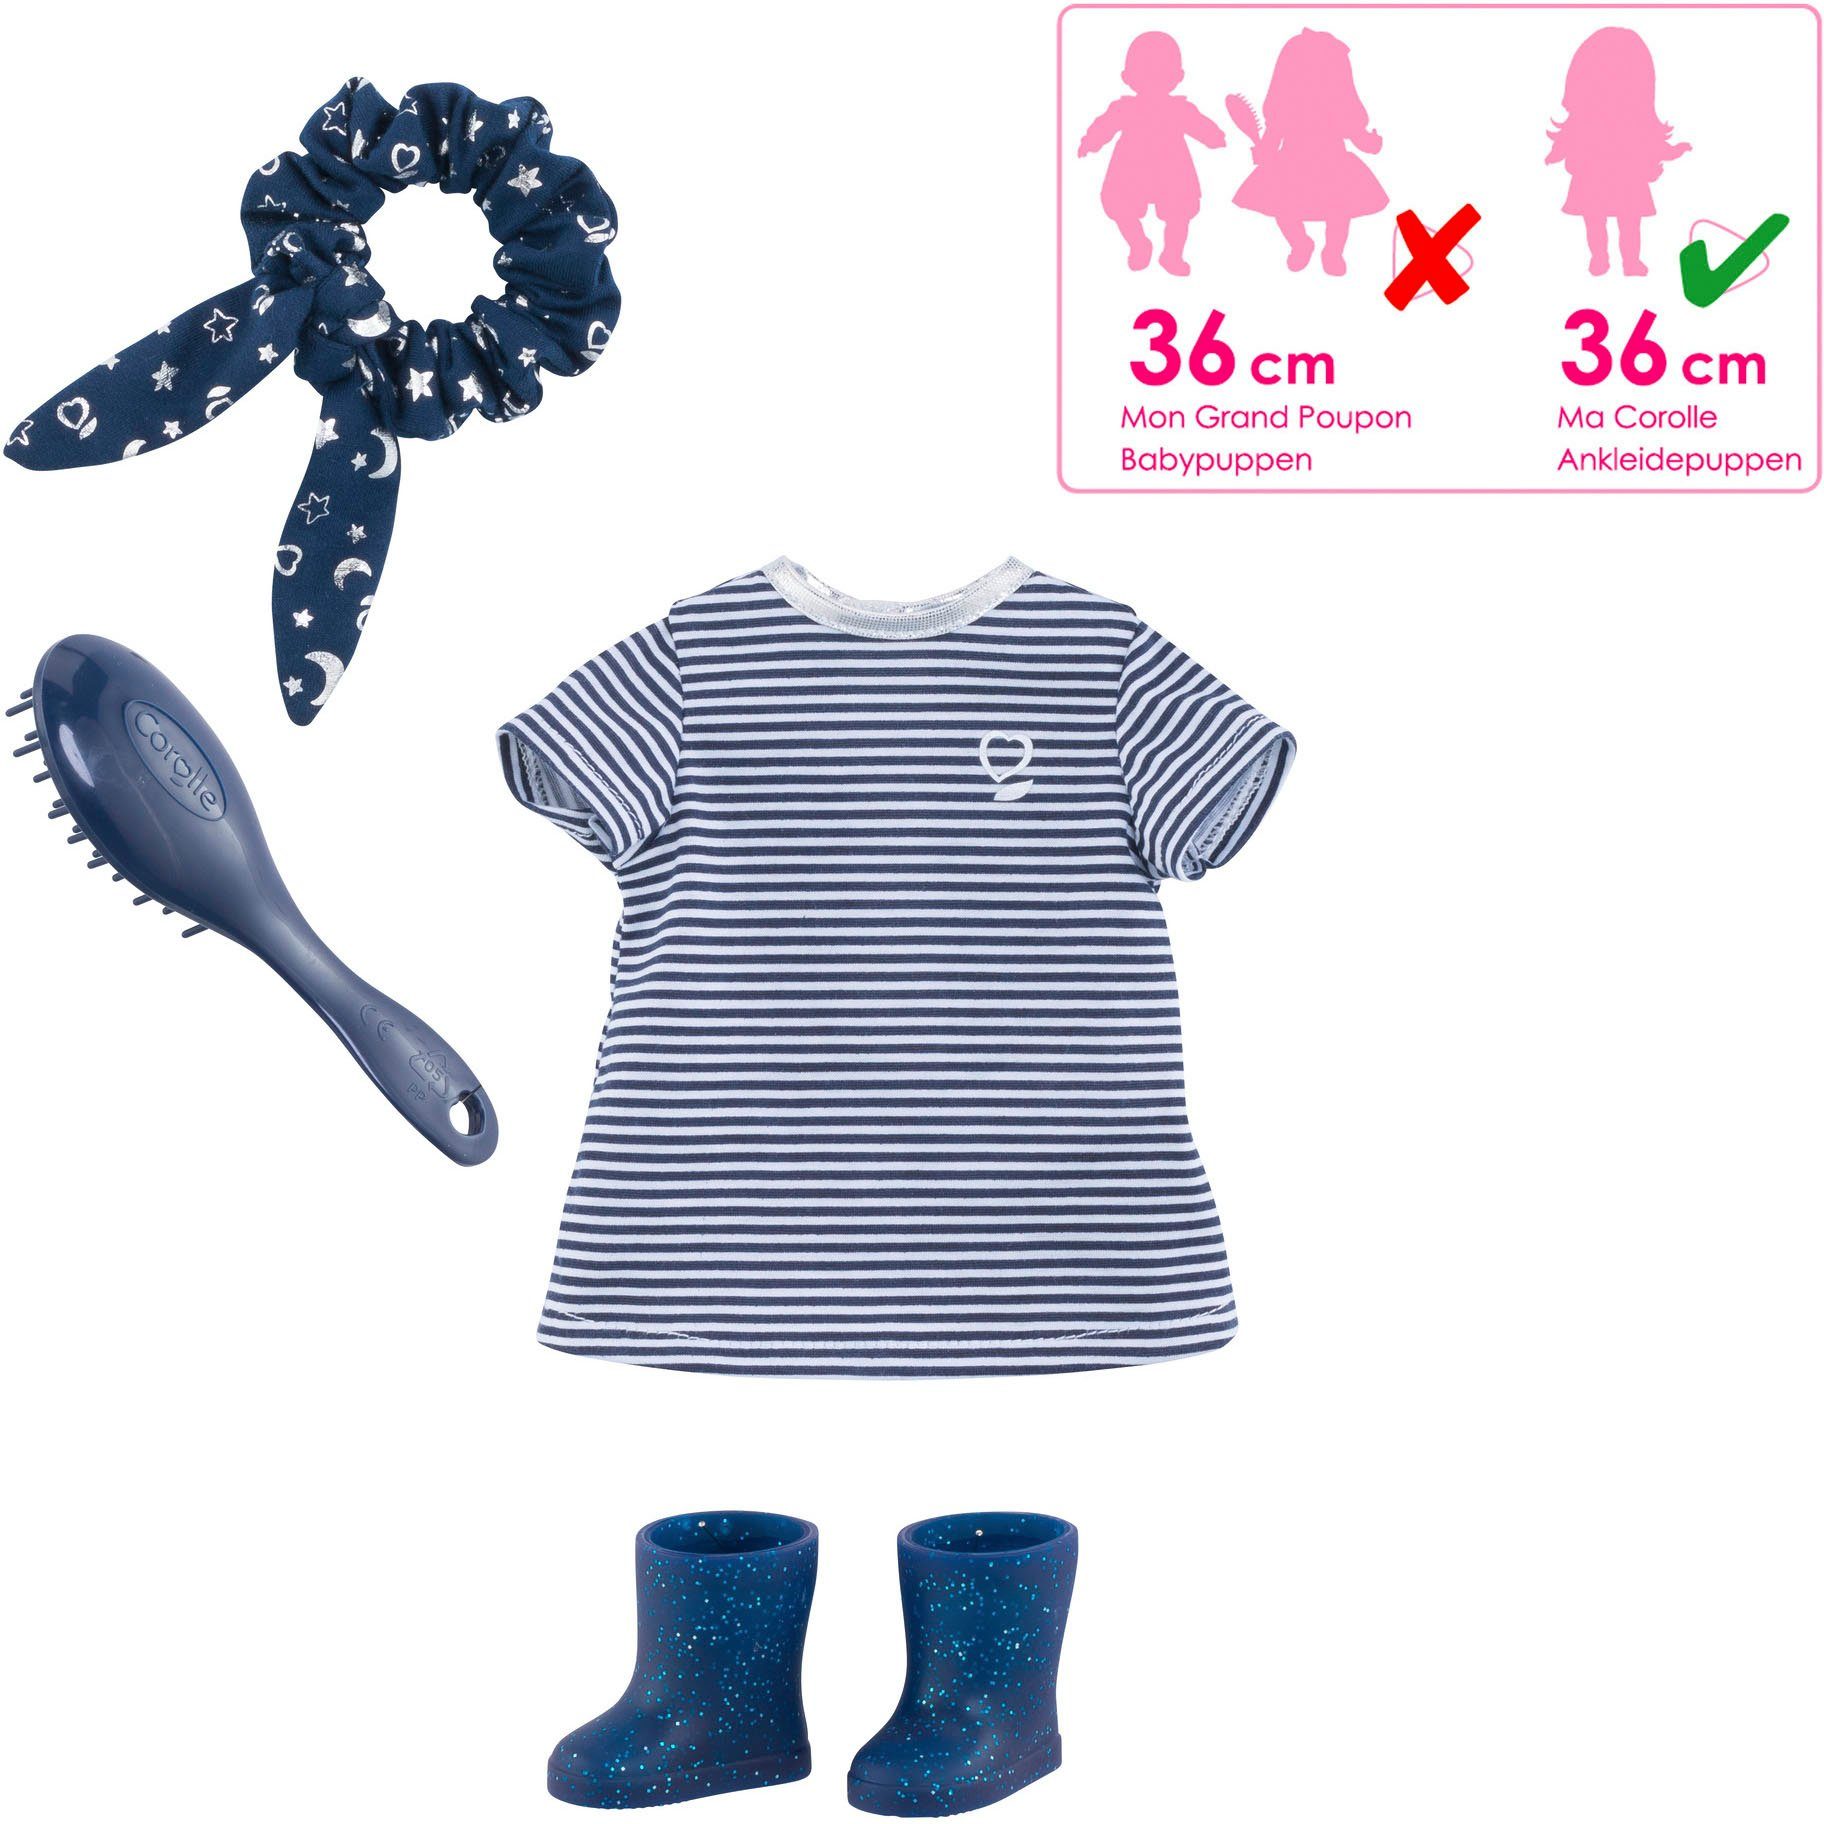 Corolle® Corolle Ma Puppenkleidung Set Outfit